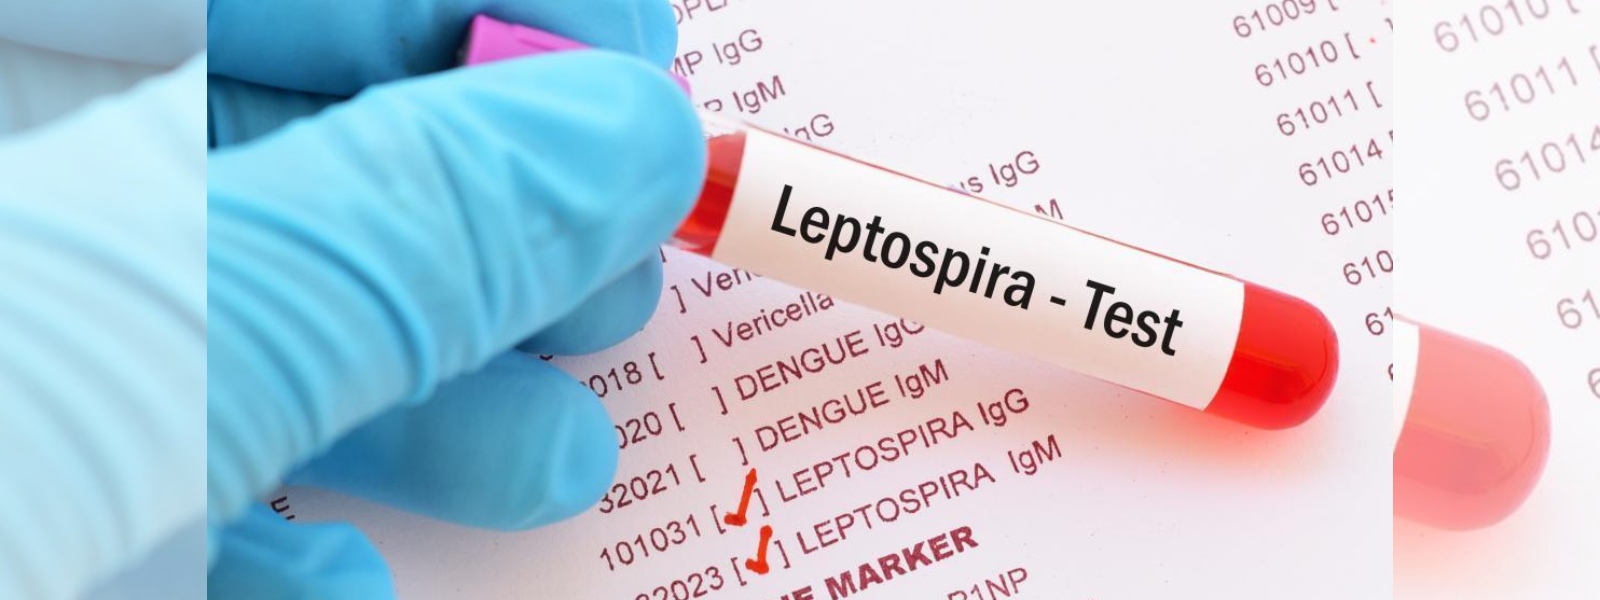 12 deaths due to Leptospirosis this year: Ministry of Health